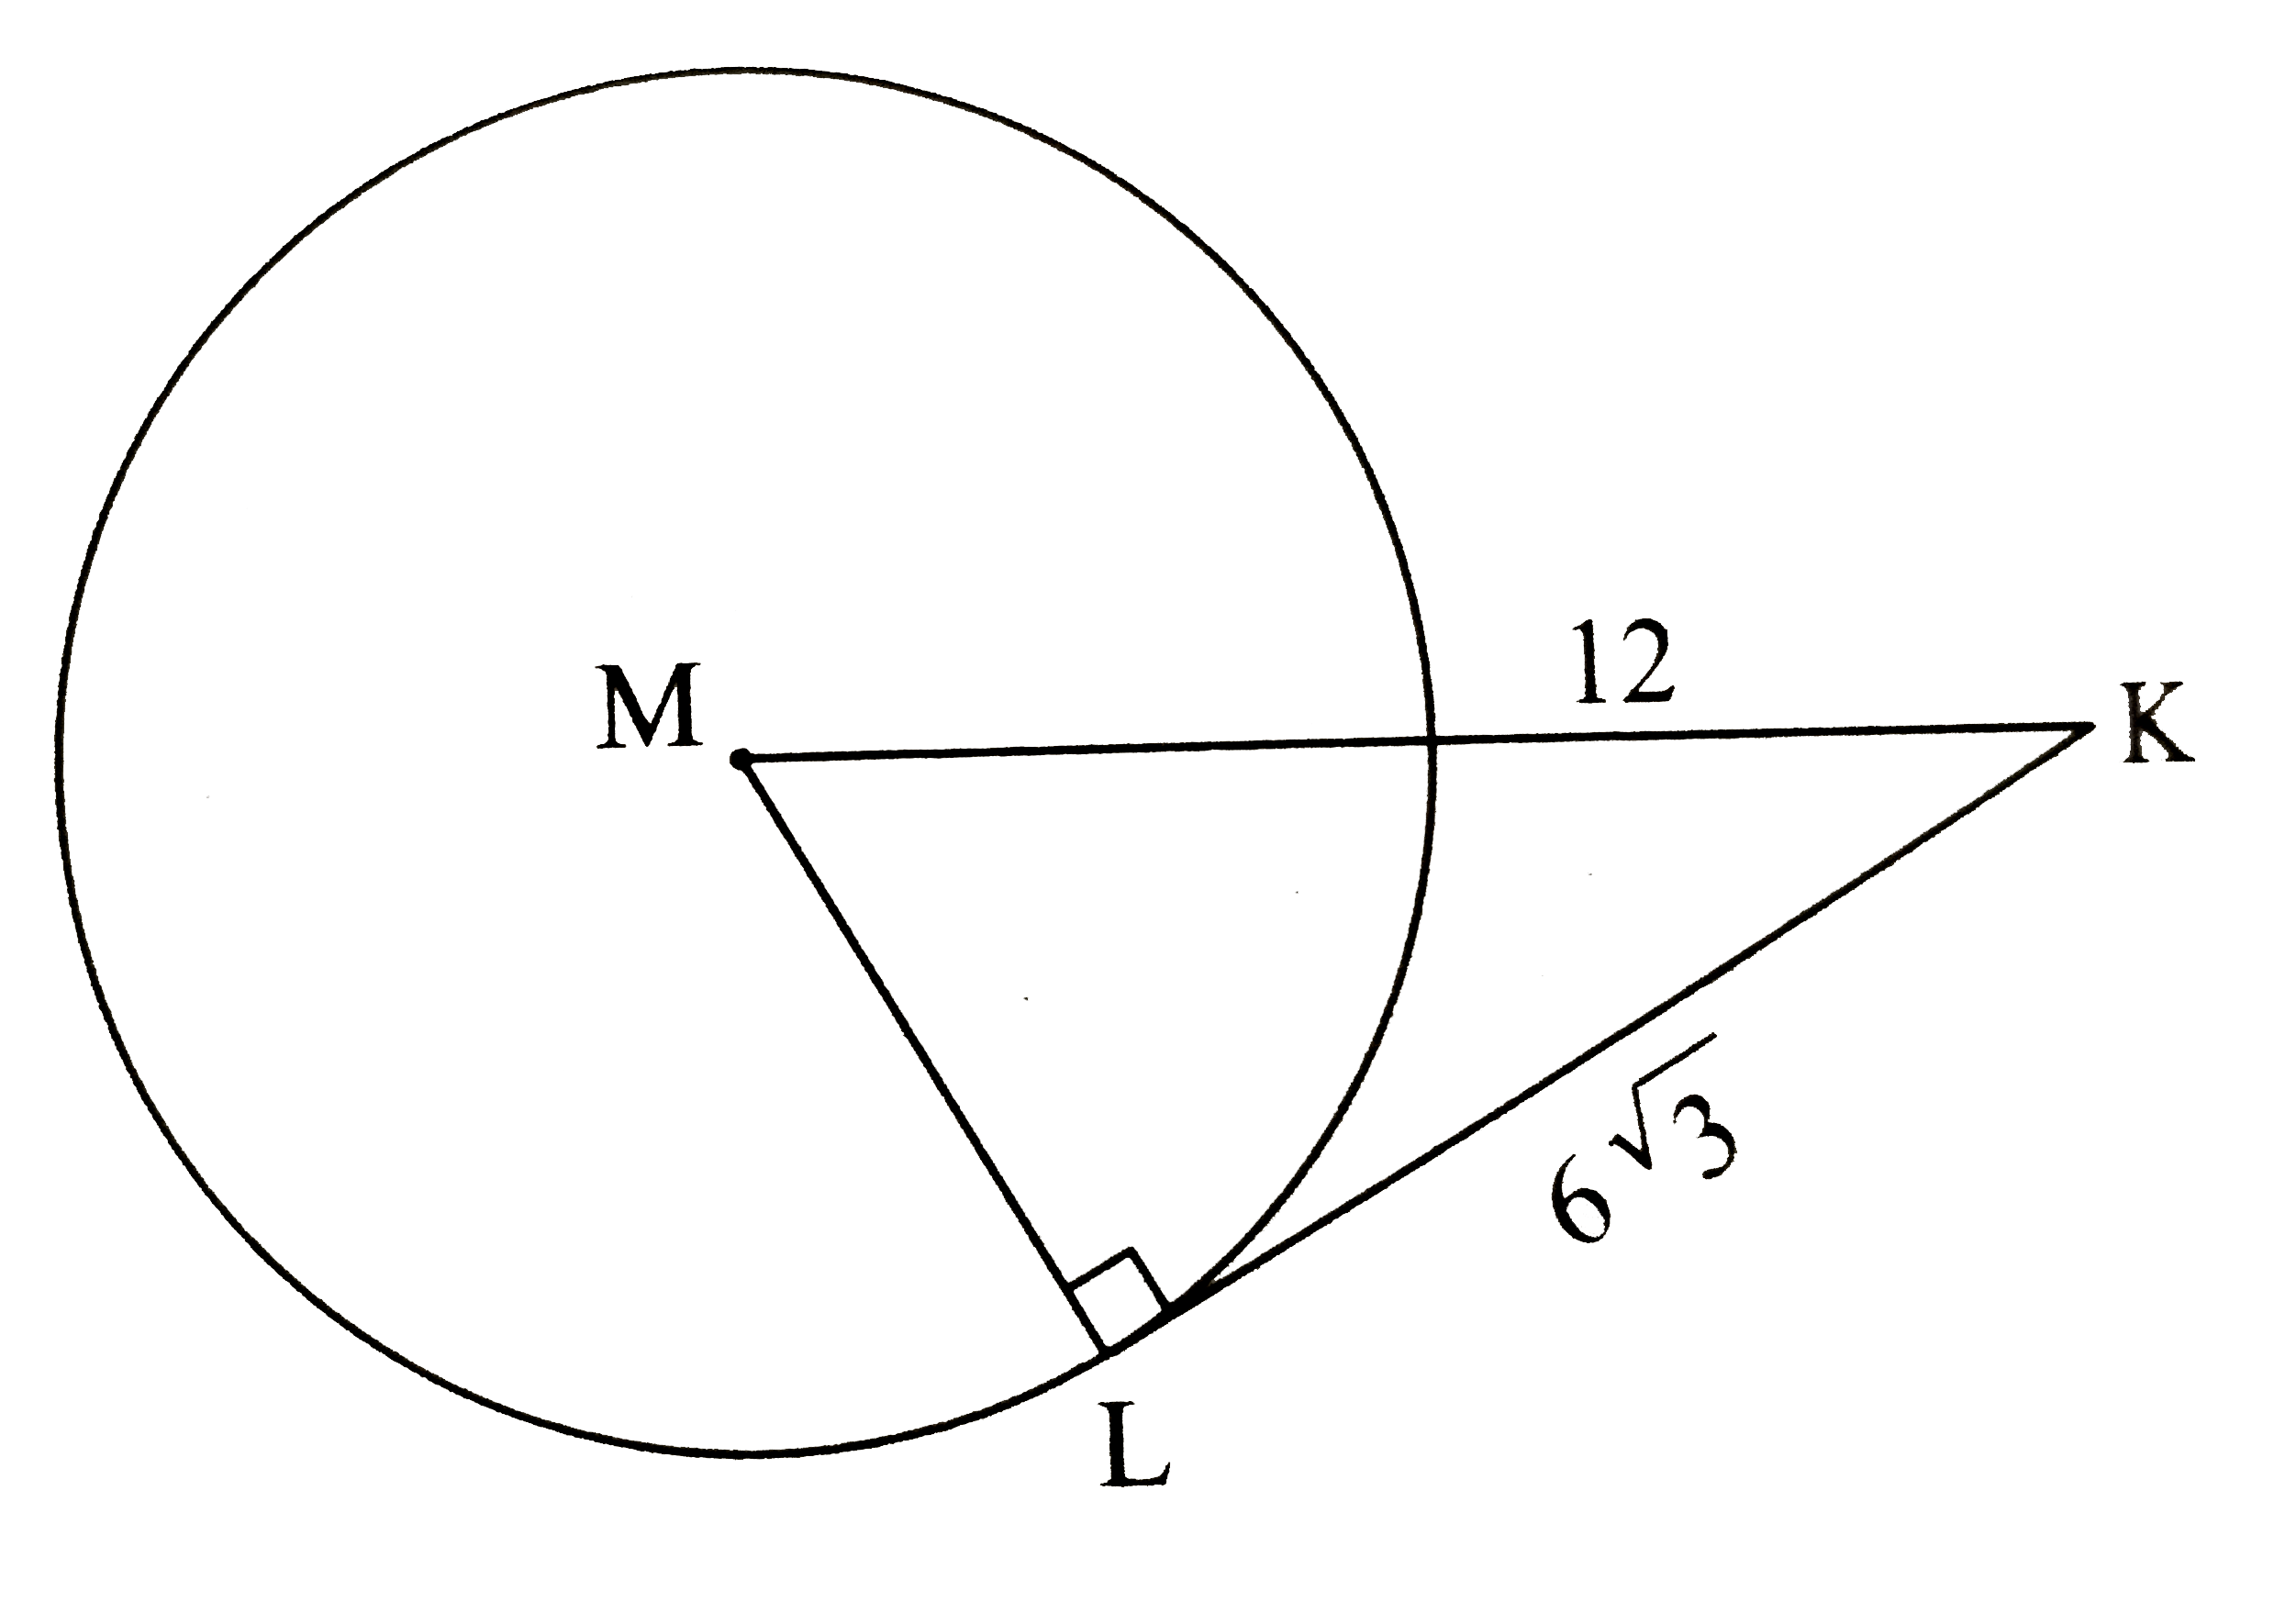 In the figure,  M is the centre of the circle and seg KL is a tangent segment. If MK = 12 , KL = 6 sqrt(3) then find,   (1) Radius of the circle,    (2) Measures of / K  and / M .